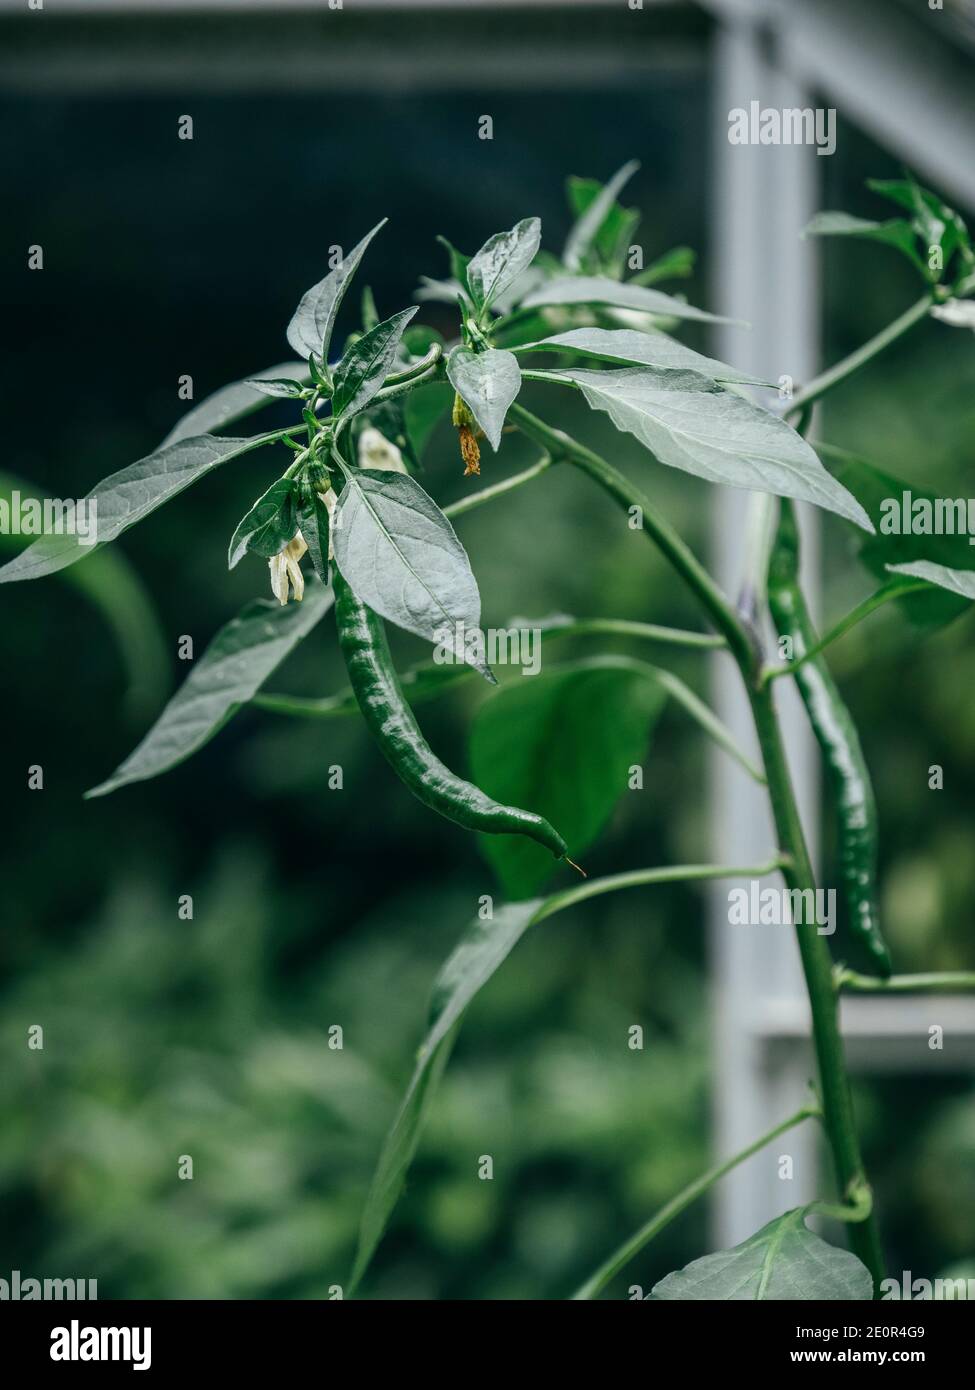 Close up of chilli plant in greenhouse with white flowers and bearing long thin green chillies Stock Photo